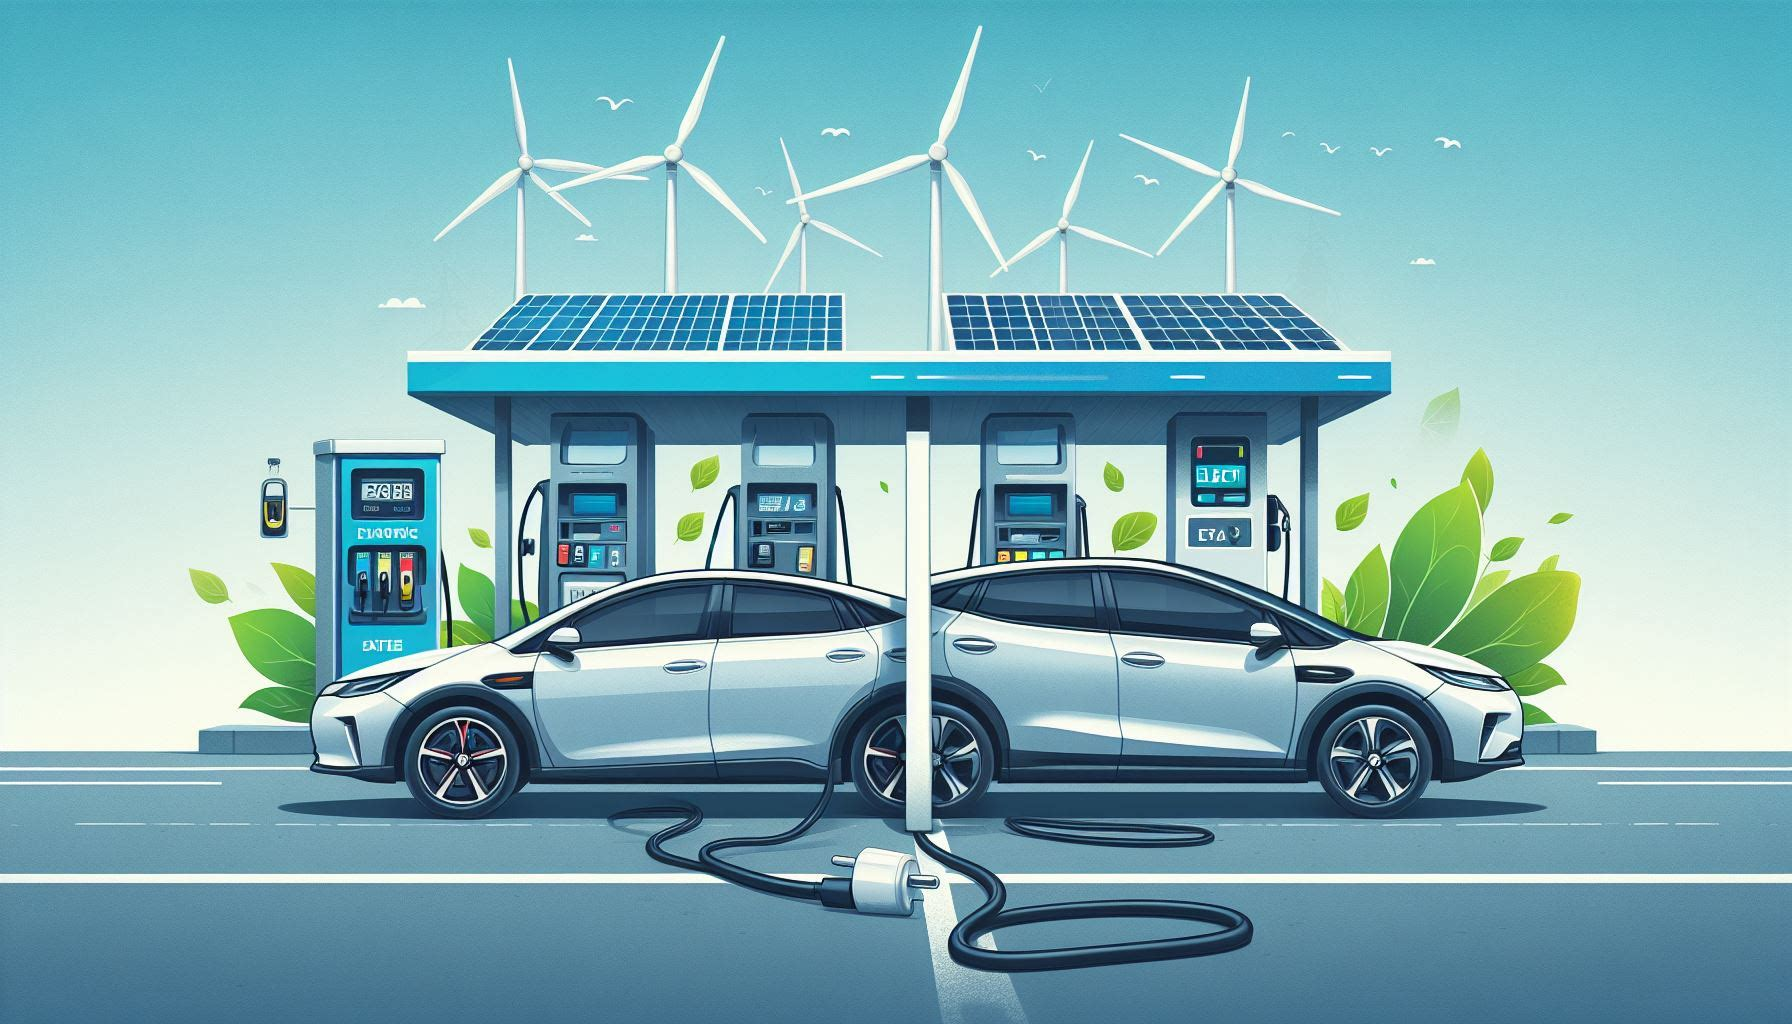 Comparison Between Hybrid Electric and Fully Electric Vehicles